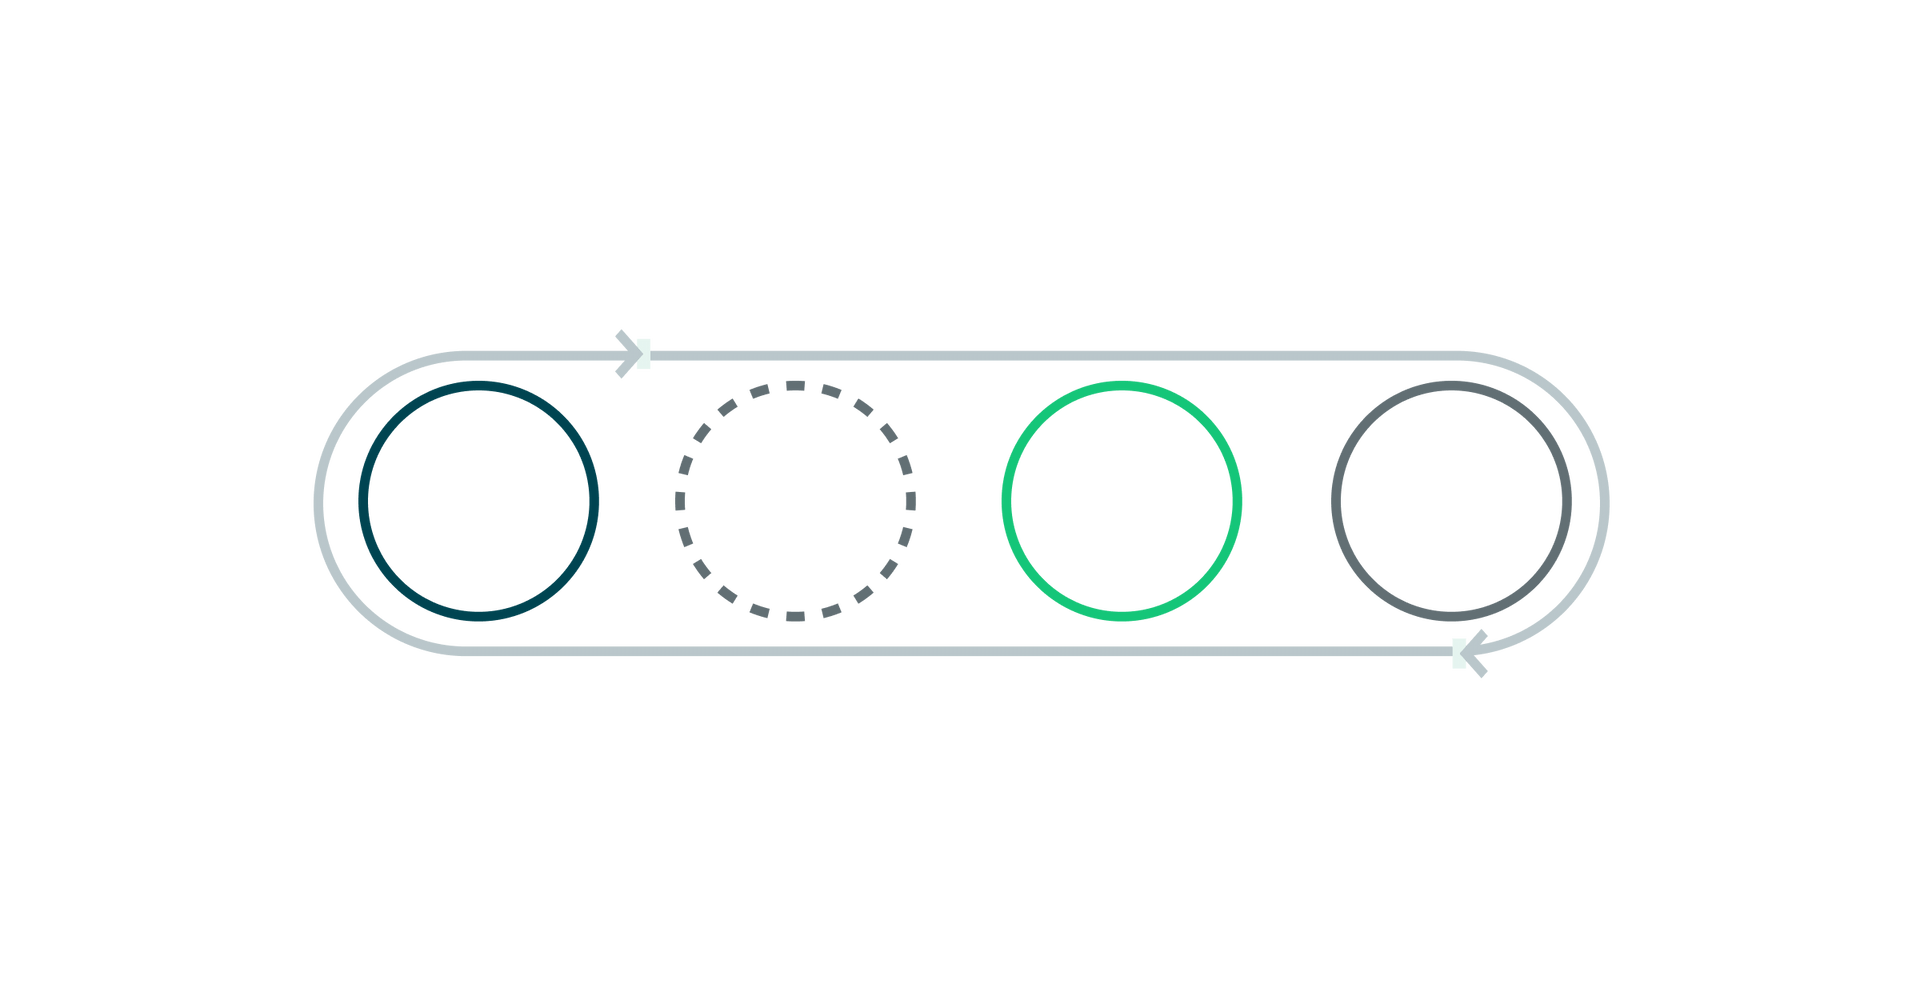 A transparent illustration of four hollow circles in sequential order, each with different designs, surrounded by a cylindrical line with arrow, to demonstrate the 4 stages of business observability